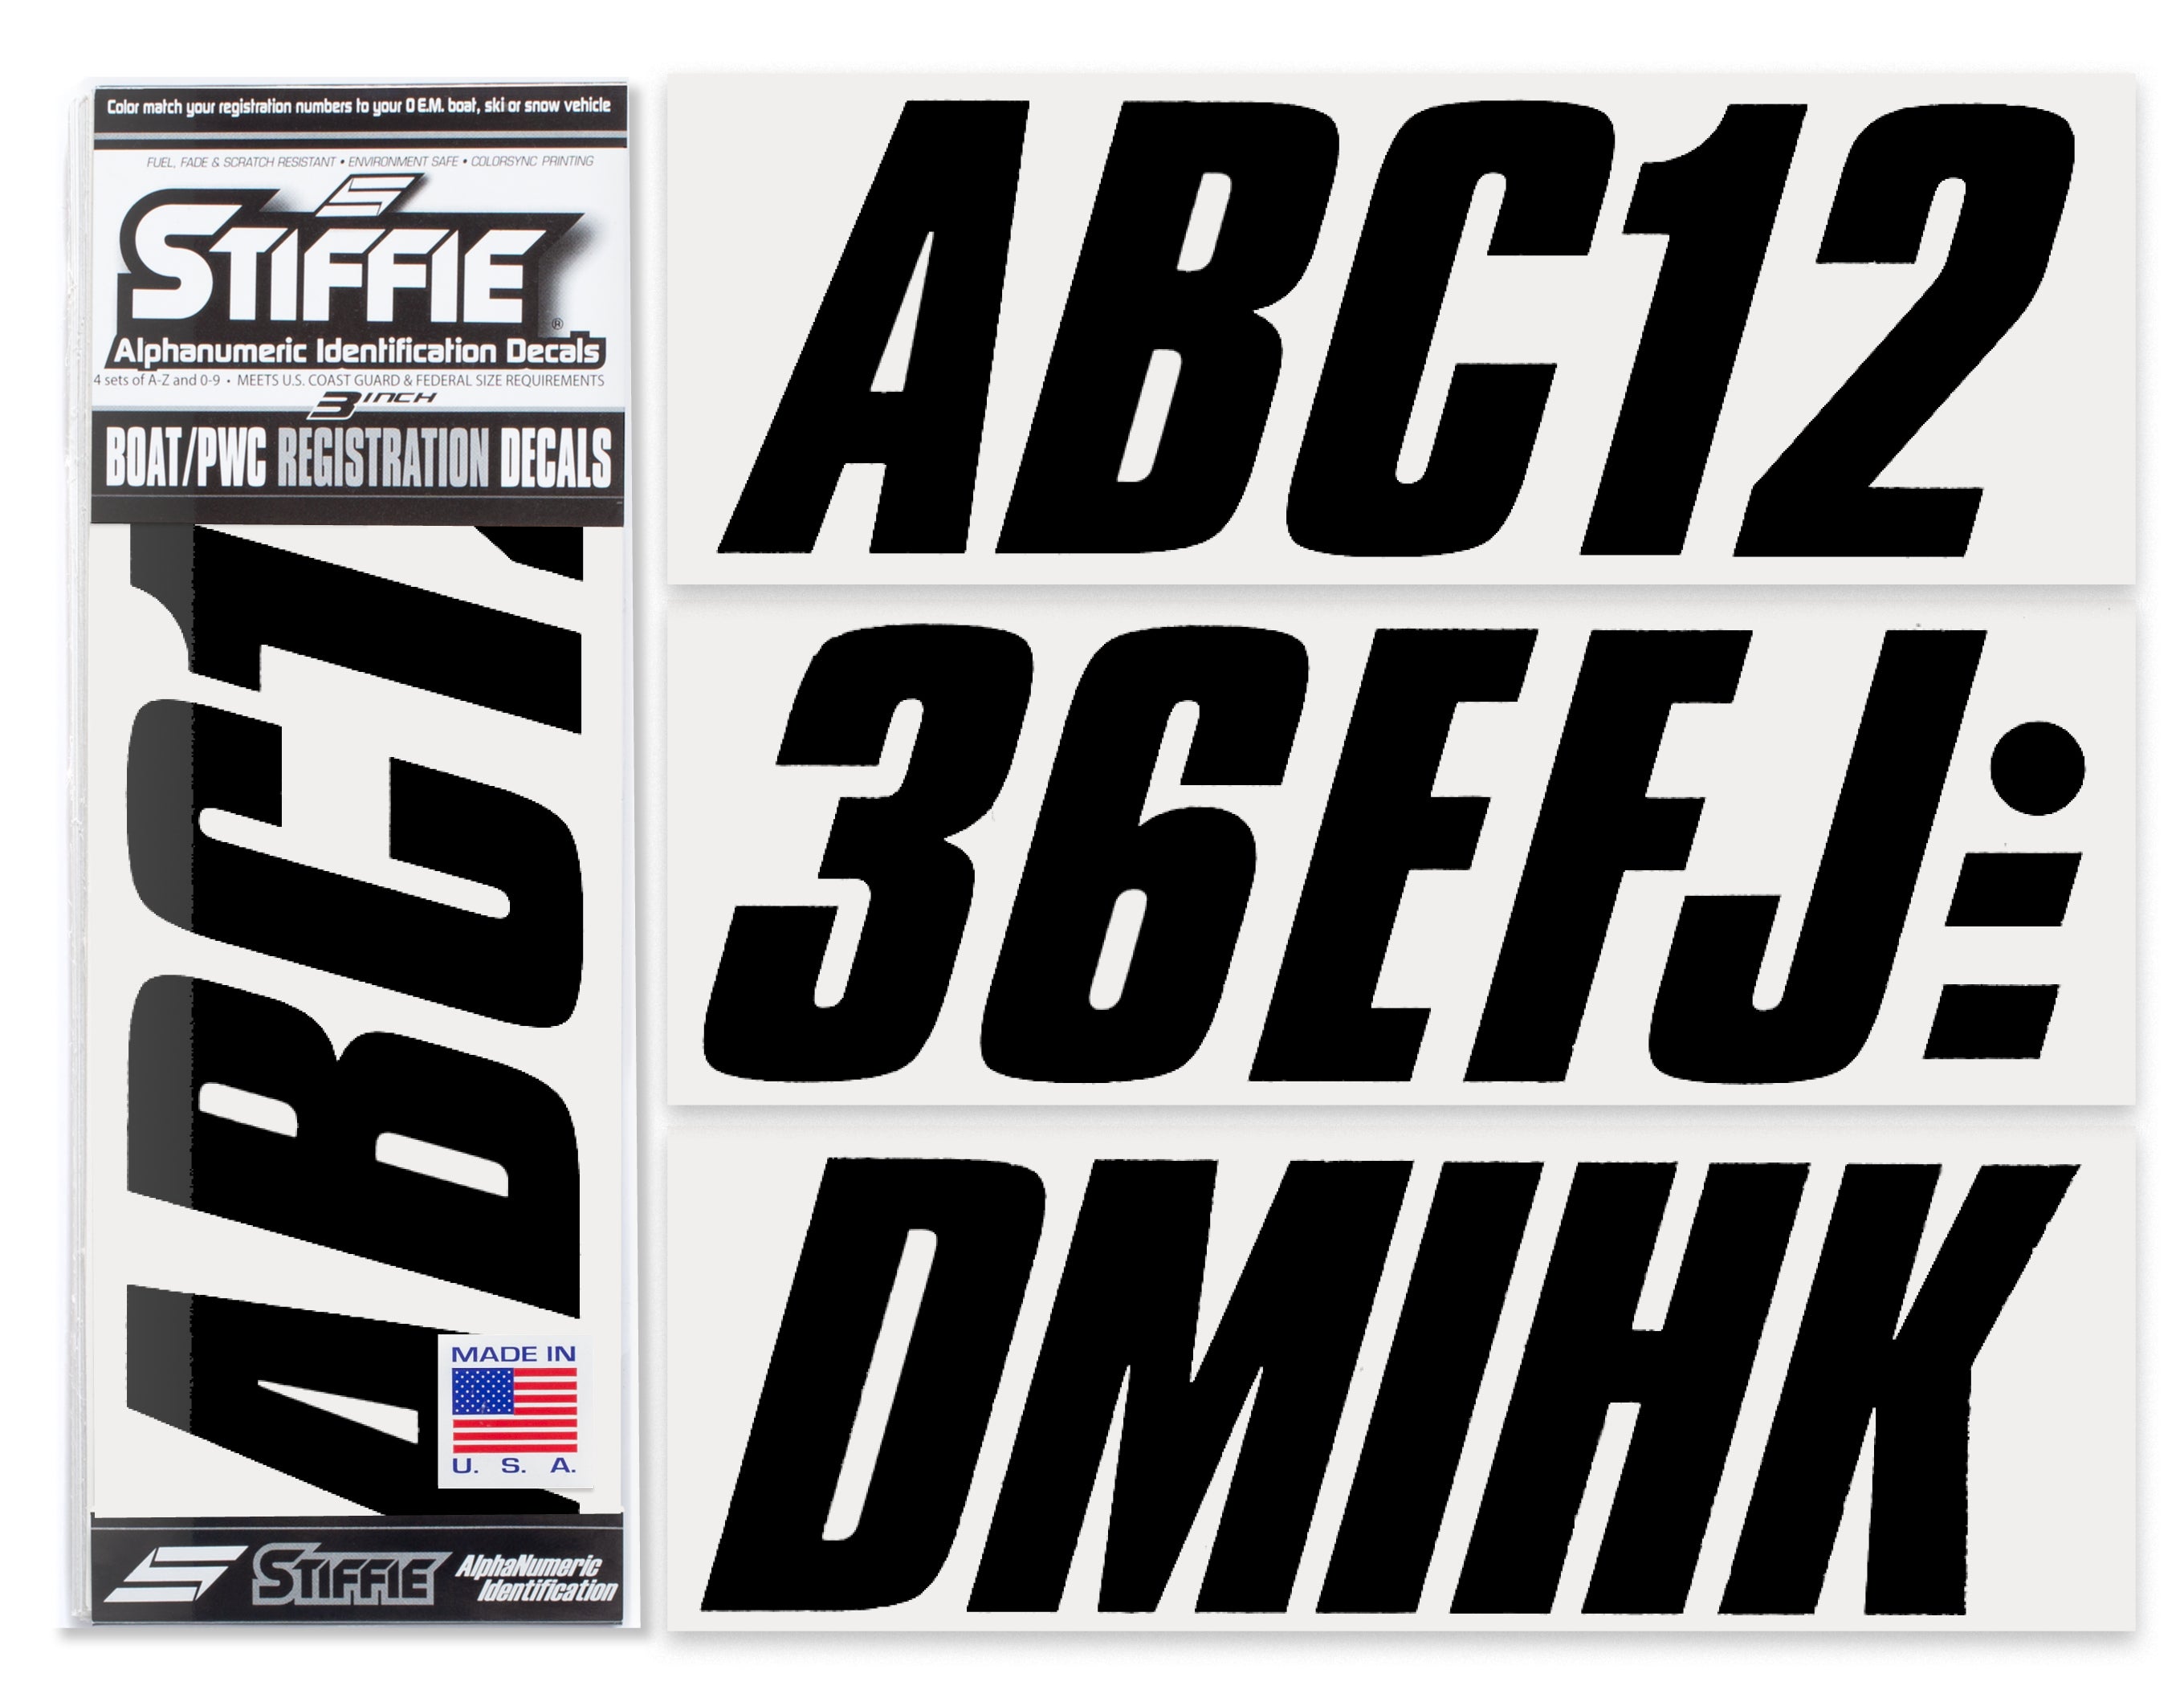 STIFFIE Shift Black 3" ID Kit Alpha-Numeric Registration Identification Numbers Stickers Decals for Boats & Personal Watercraft